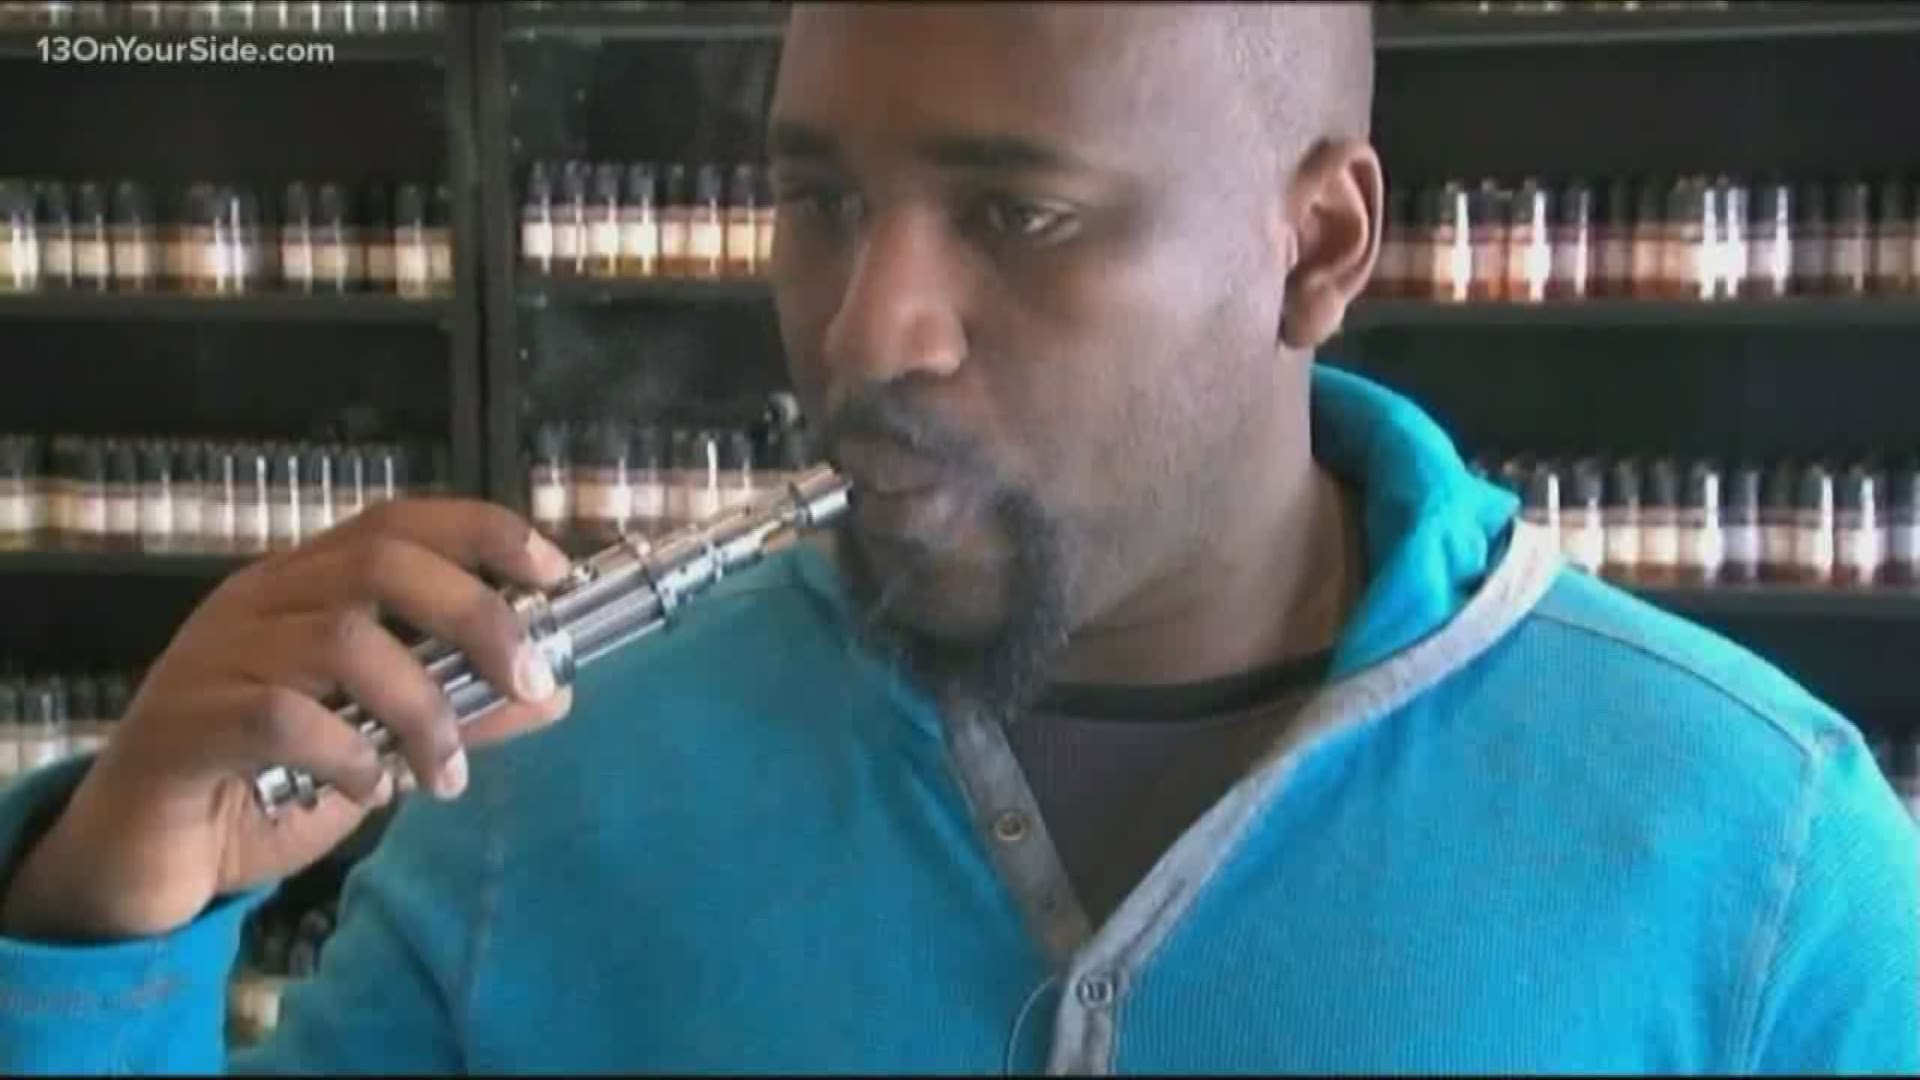 The FDA is asking that those who vape or use e-cigarettes to submit a report, with as much detail as possible, to their investigation on whether e-cigarette use and seizures are related in any way. The administration is looking into 127 reports of seizures and other neurological symptoms with a possible link to e-cigarettes and vaping. The cases happened between 2010 and 2019, but don't necessarily indicate an increase in frequency or prevalence.